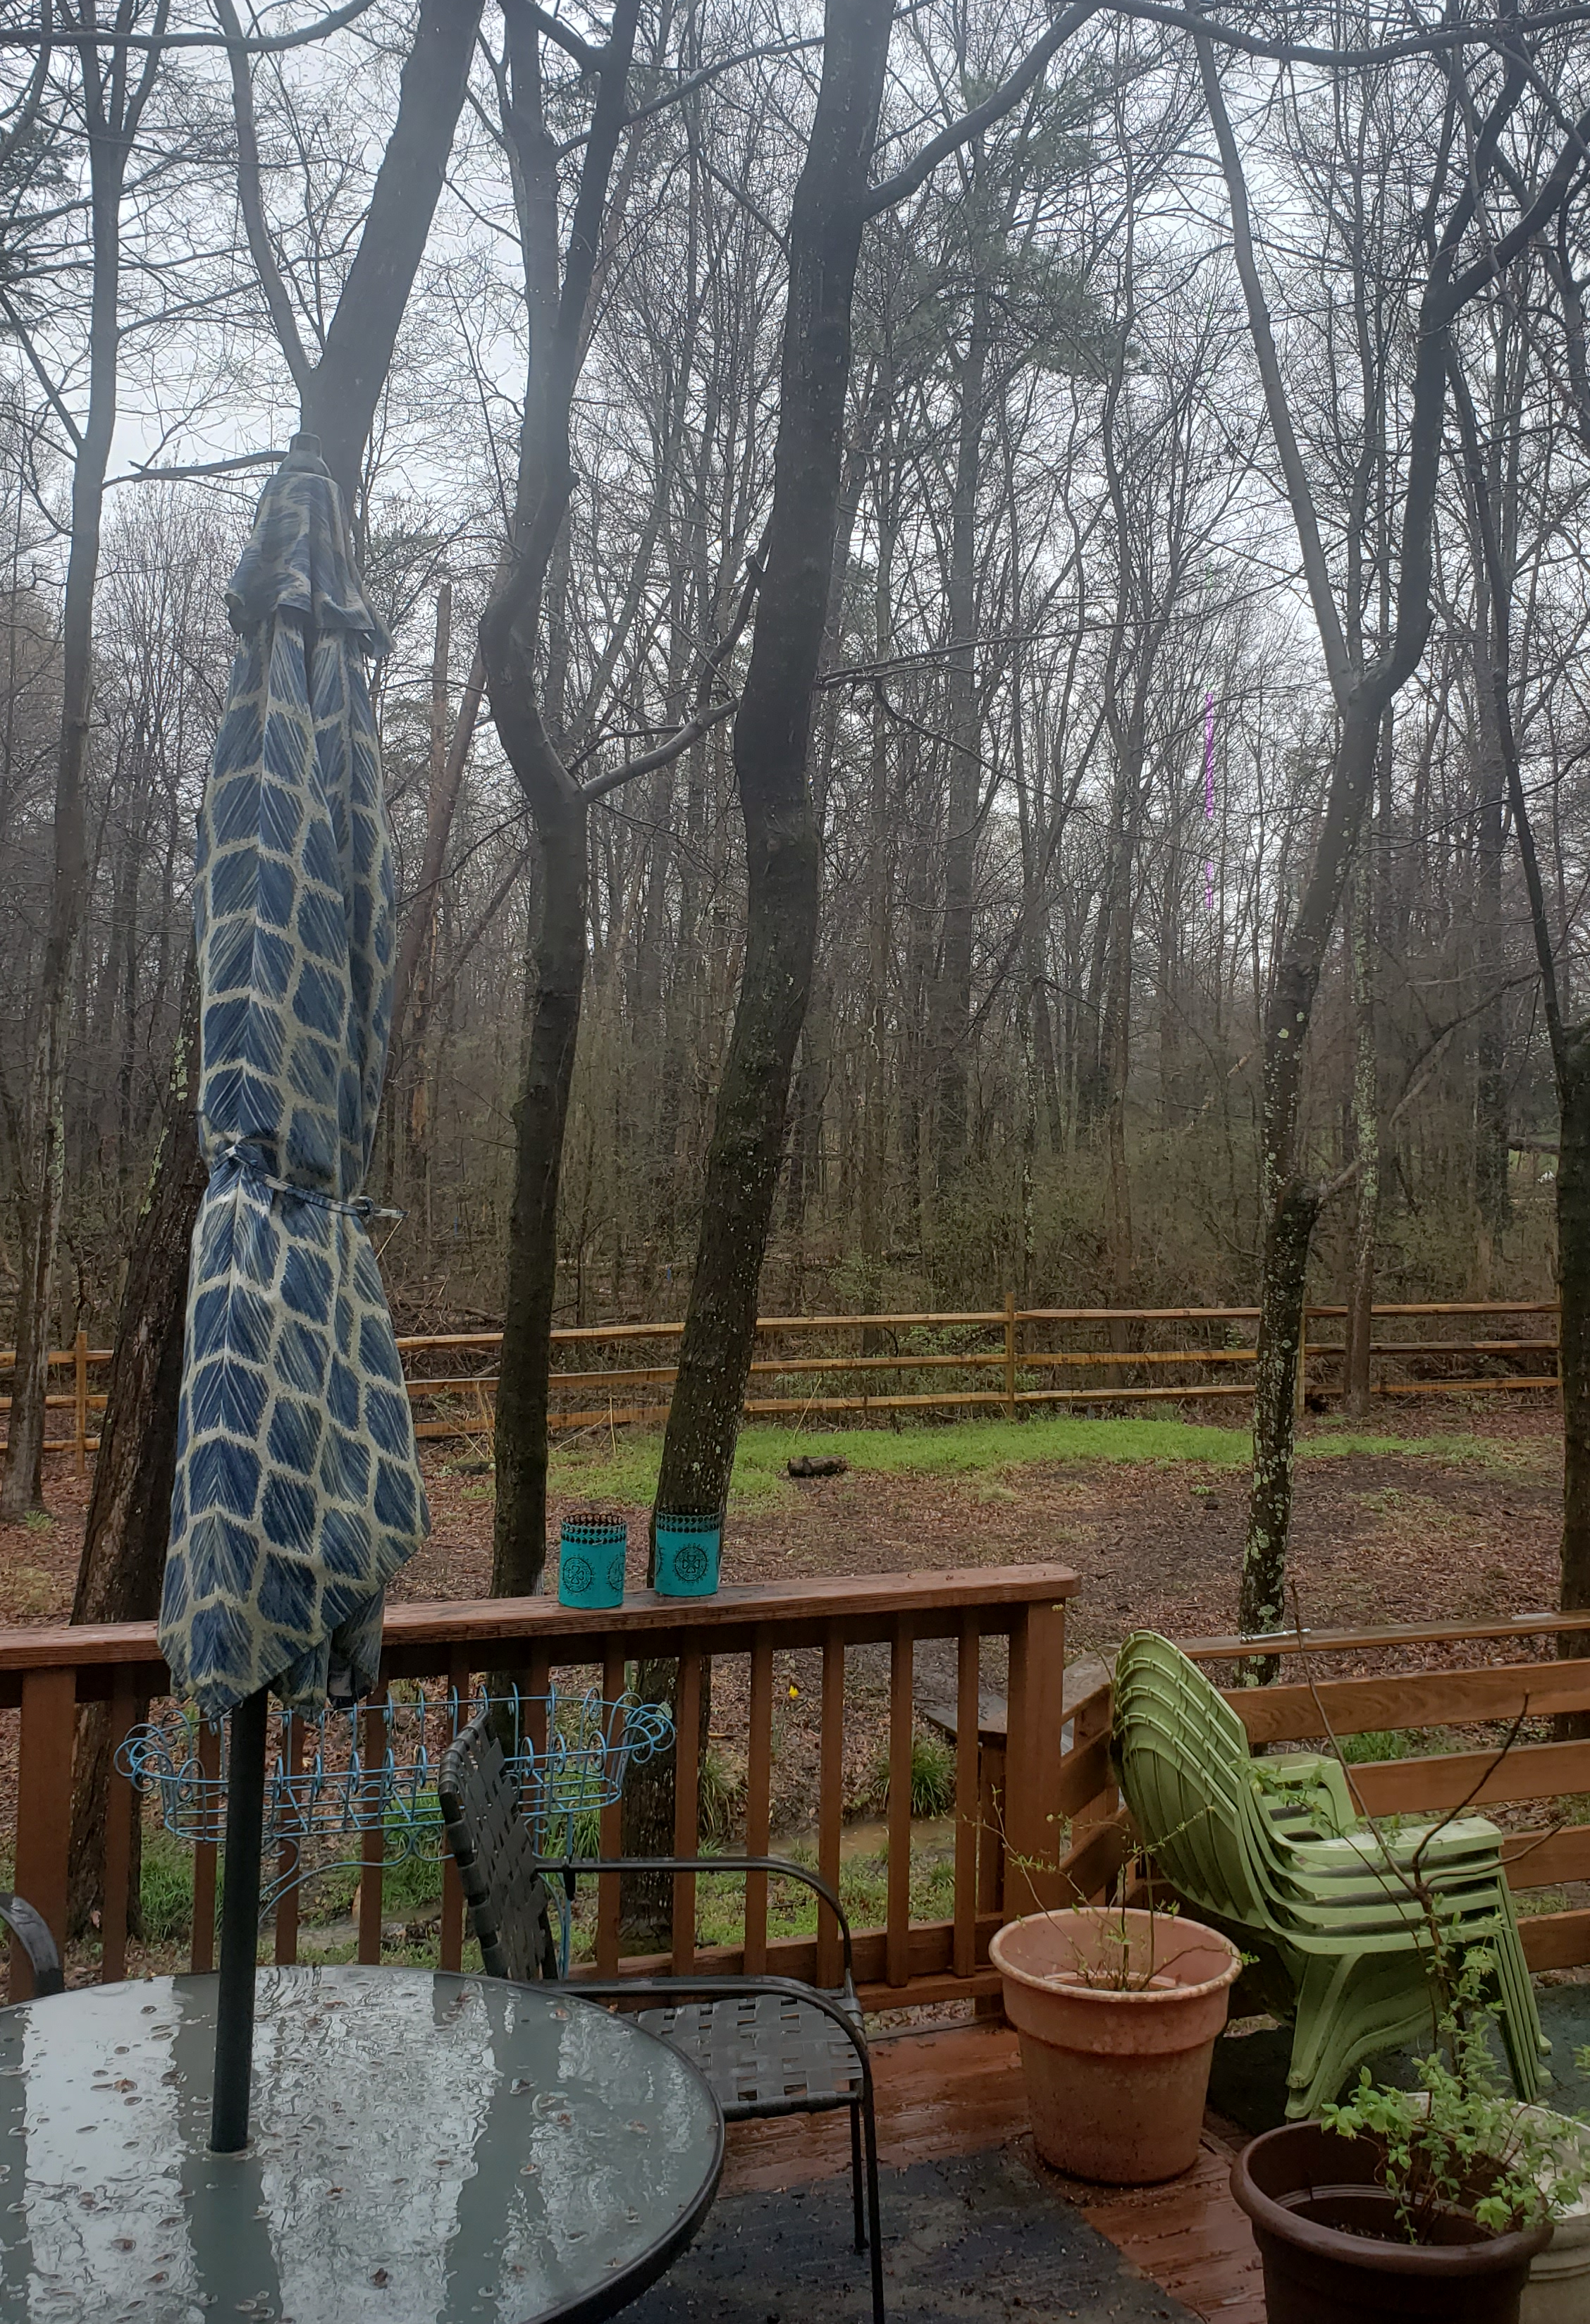 A photo of the backyard before we removed trees this spring. Some of the trees pictured in the foreground here were removed.